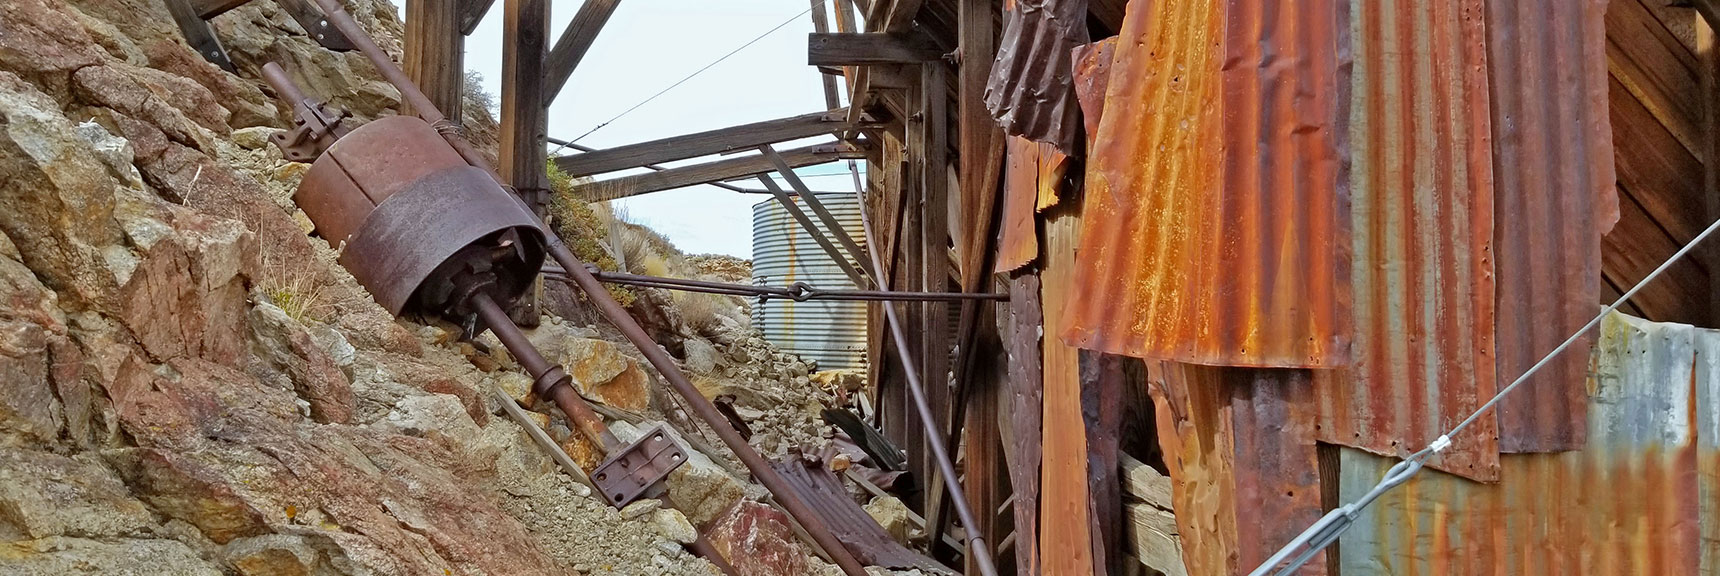 Rock Crusher Implement? Just a Guess. | Skidoo Stamp Mill, Panamint Mountains, Death Valley National Park, CA